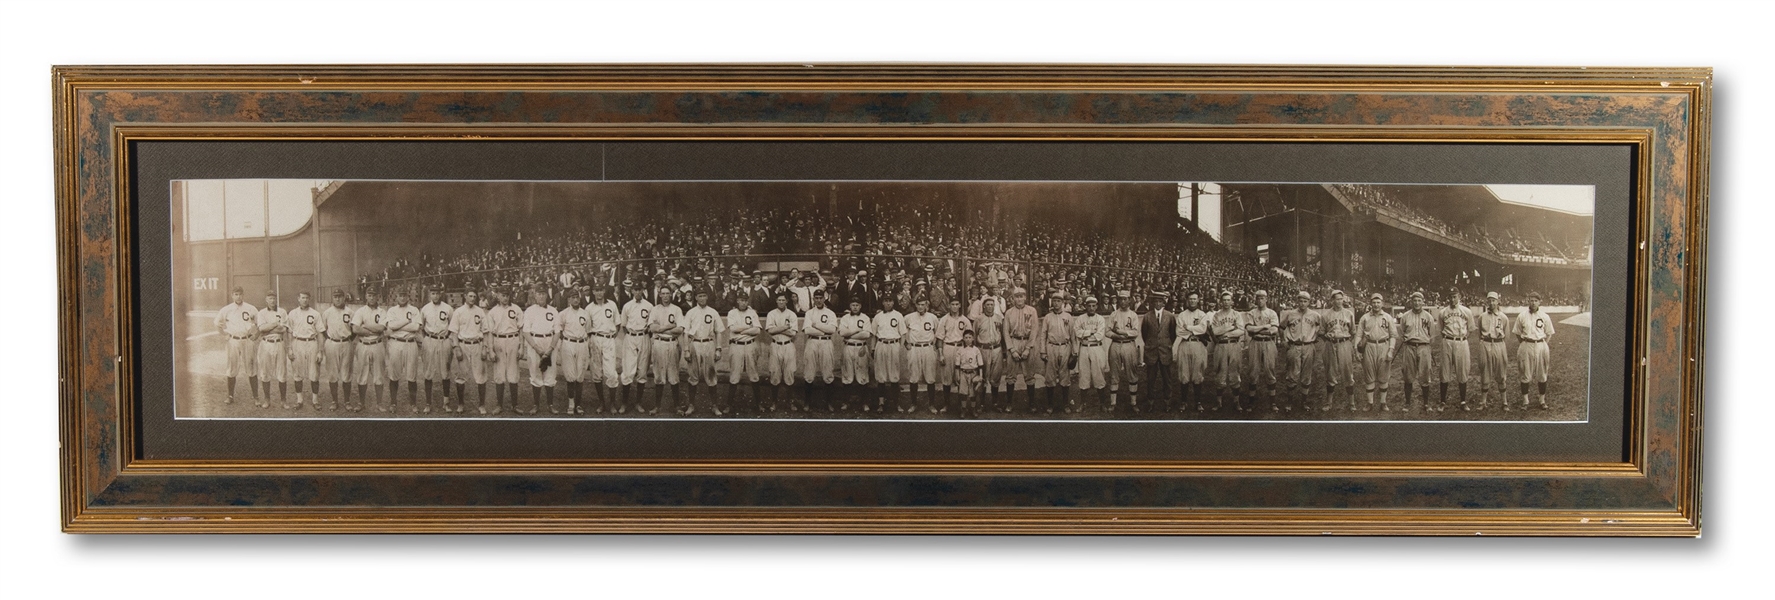 EXQUISITE 1911 ADDIE JOSS BENEFIT GAME (CLEVELAND NAPS VS. A.L. ALL-STARS) 13.5" X 47.5" PANORAMIC PHOTOGRAPH (PSA/DNA TYPE I)